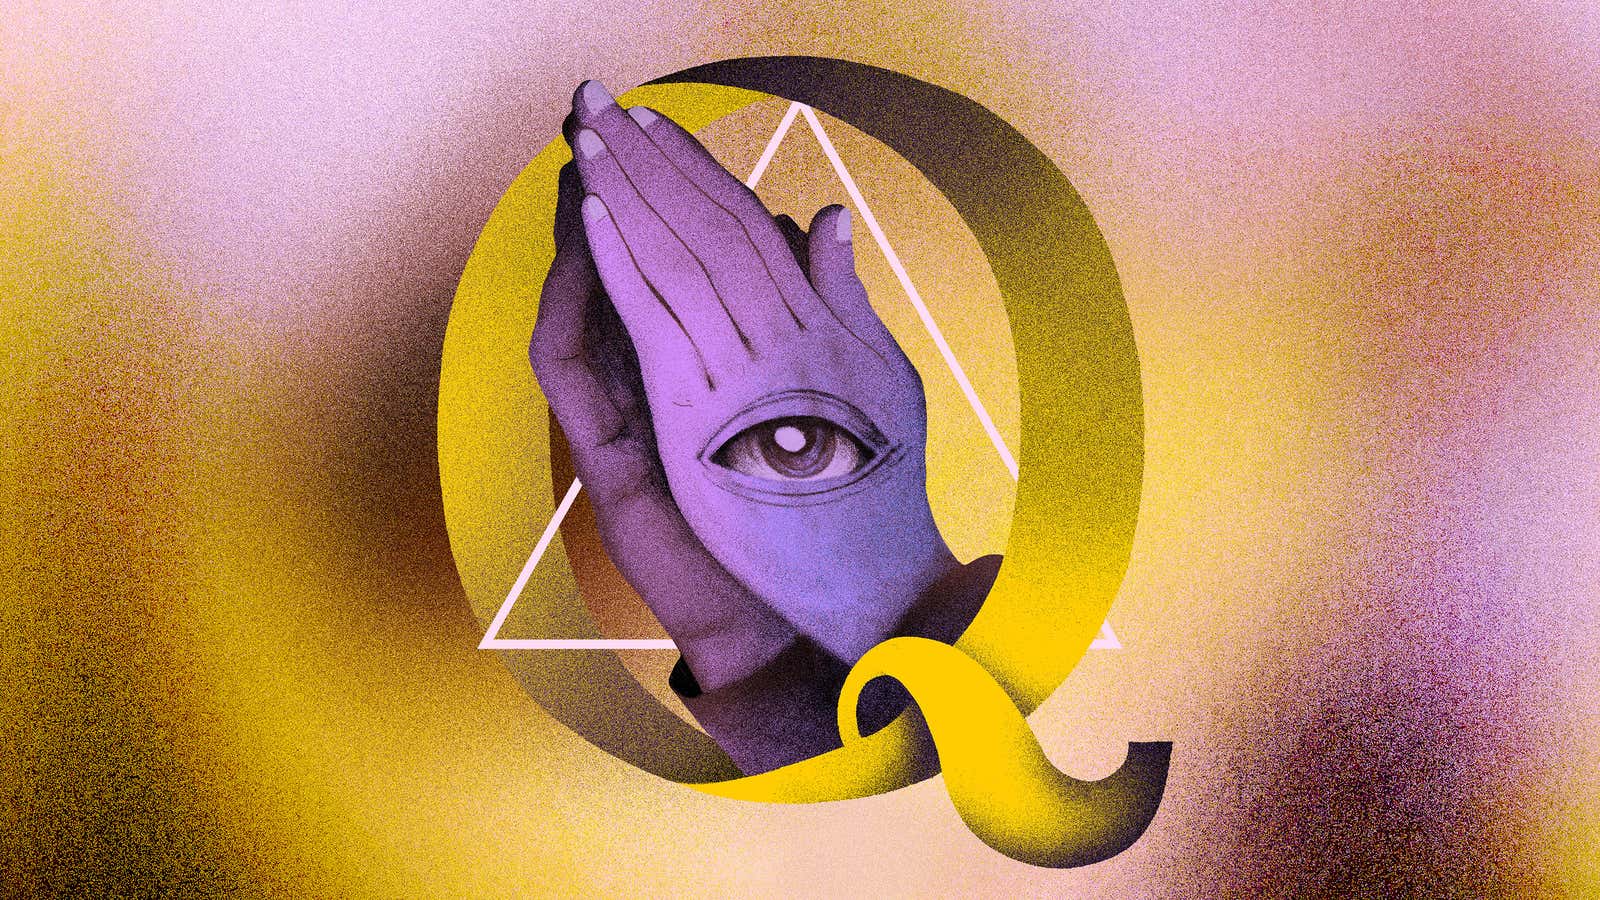 QAnon, CultTok, and Leaving It All Behind